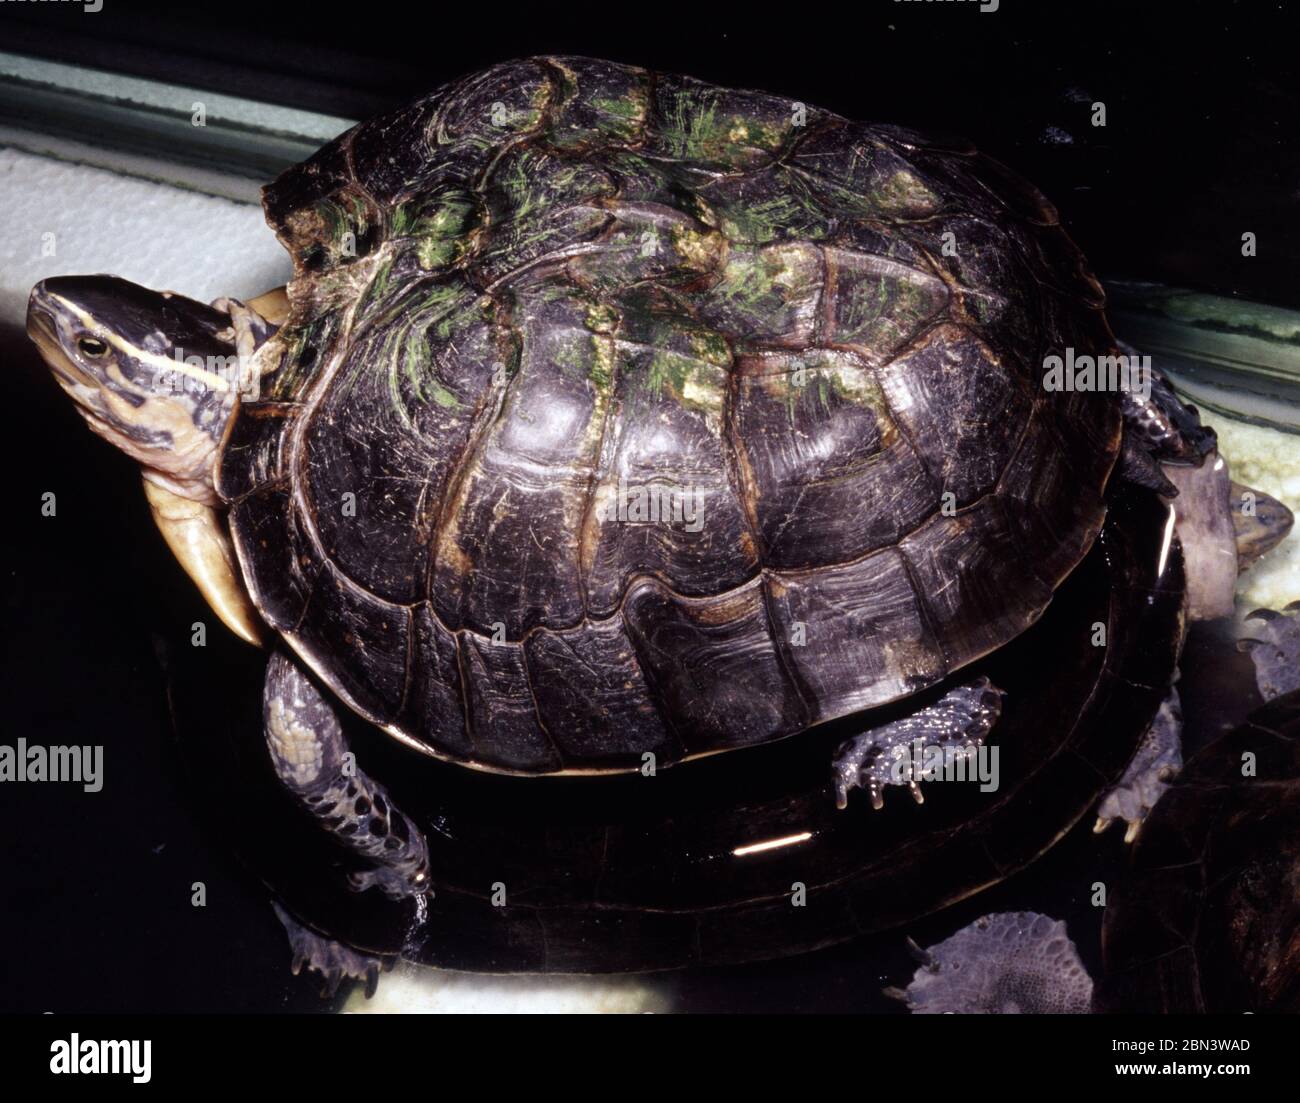 Turtle disease: Southeast Asian Box Turtle (Cuora amboinensis) with damaged shell Stock Photo